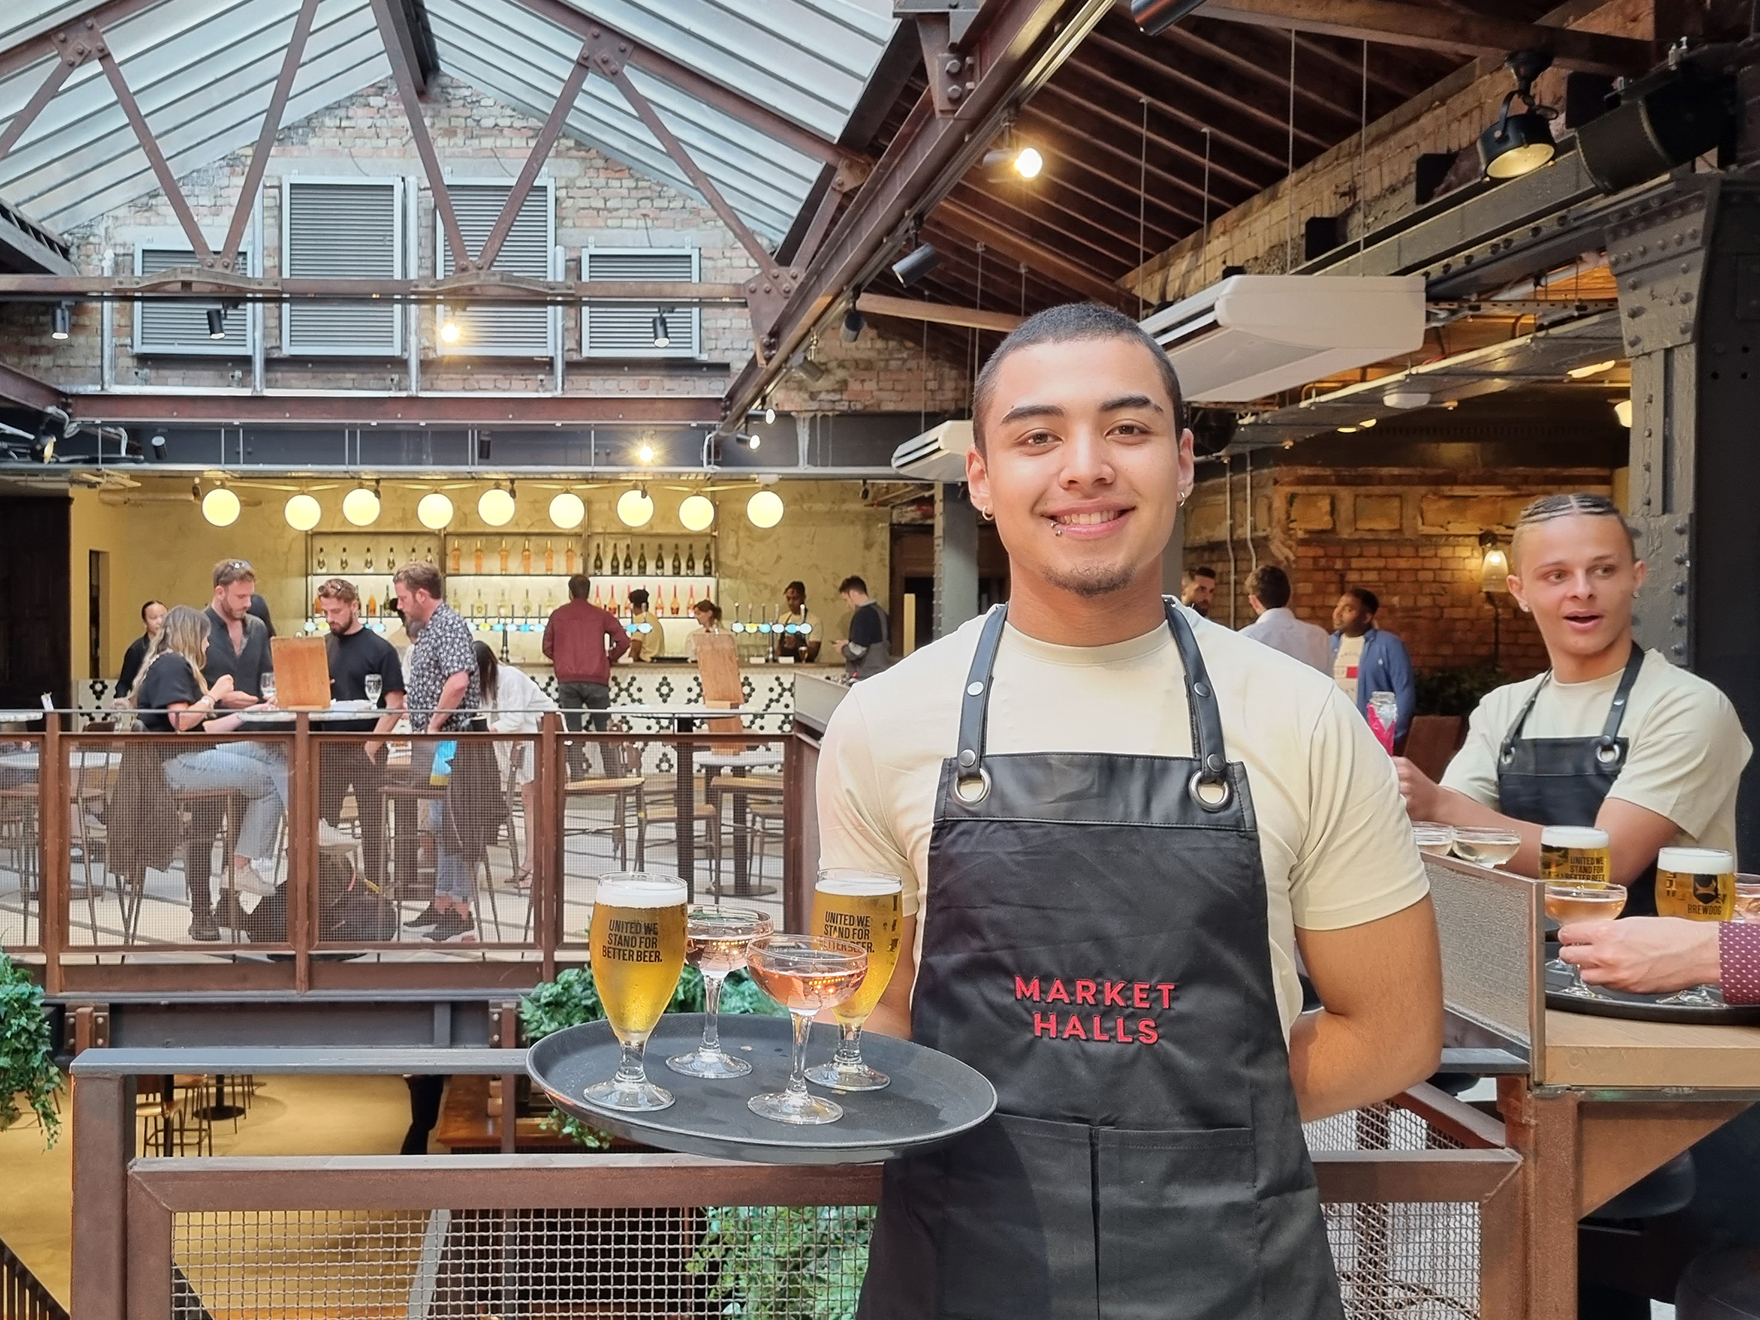 Market Hall Victoria Food Hall Welcomes Visitors Back After Covid 19 Closure Im